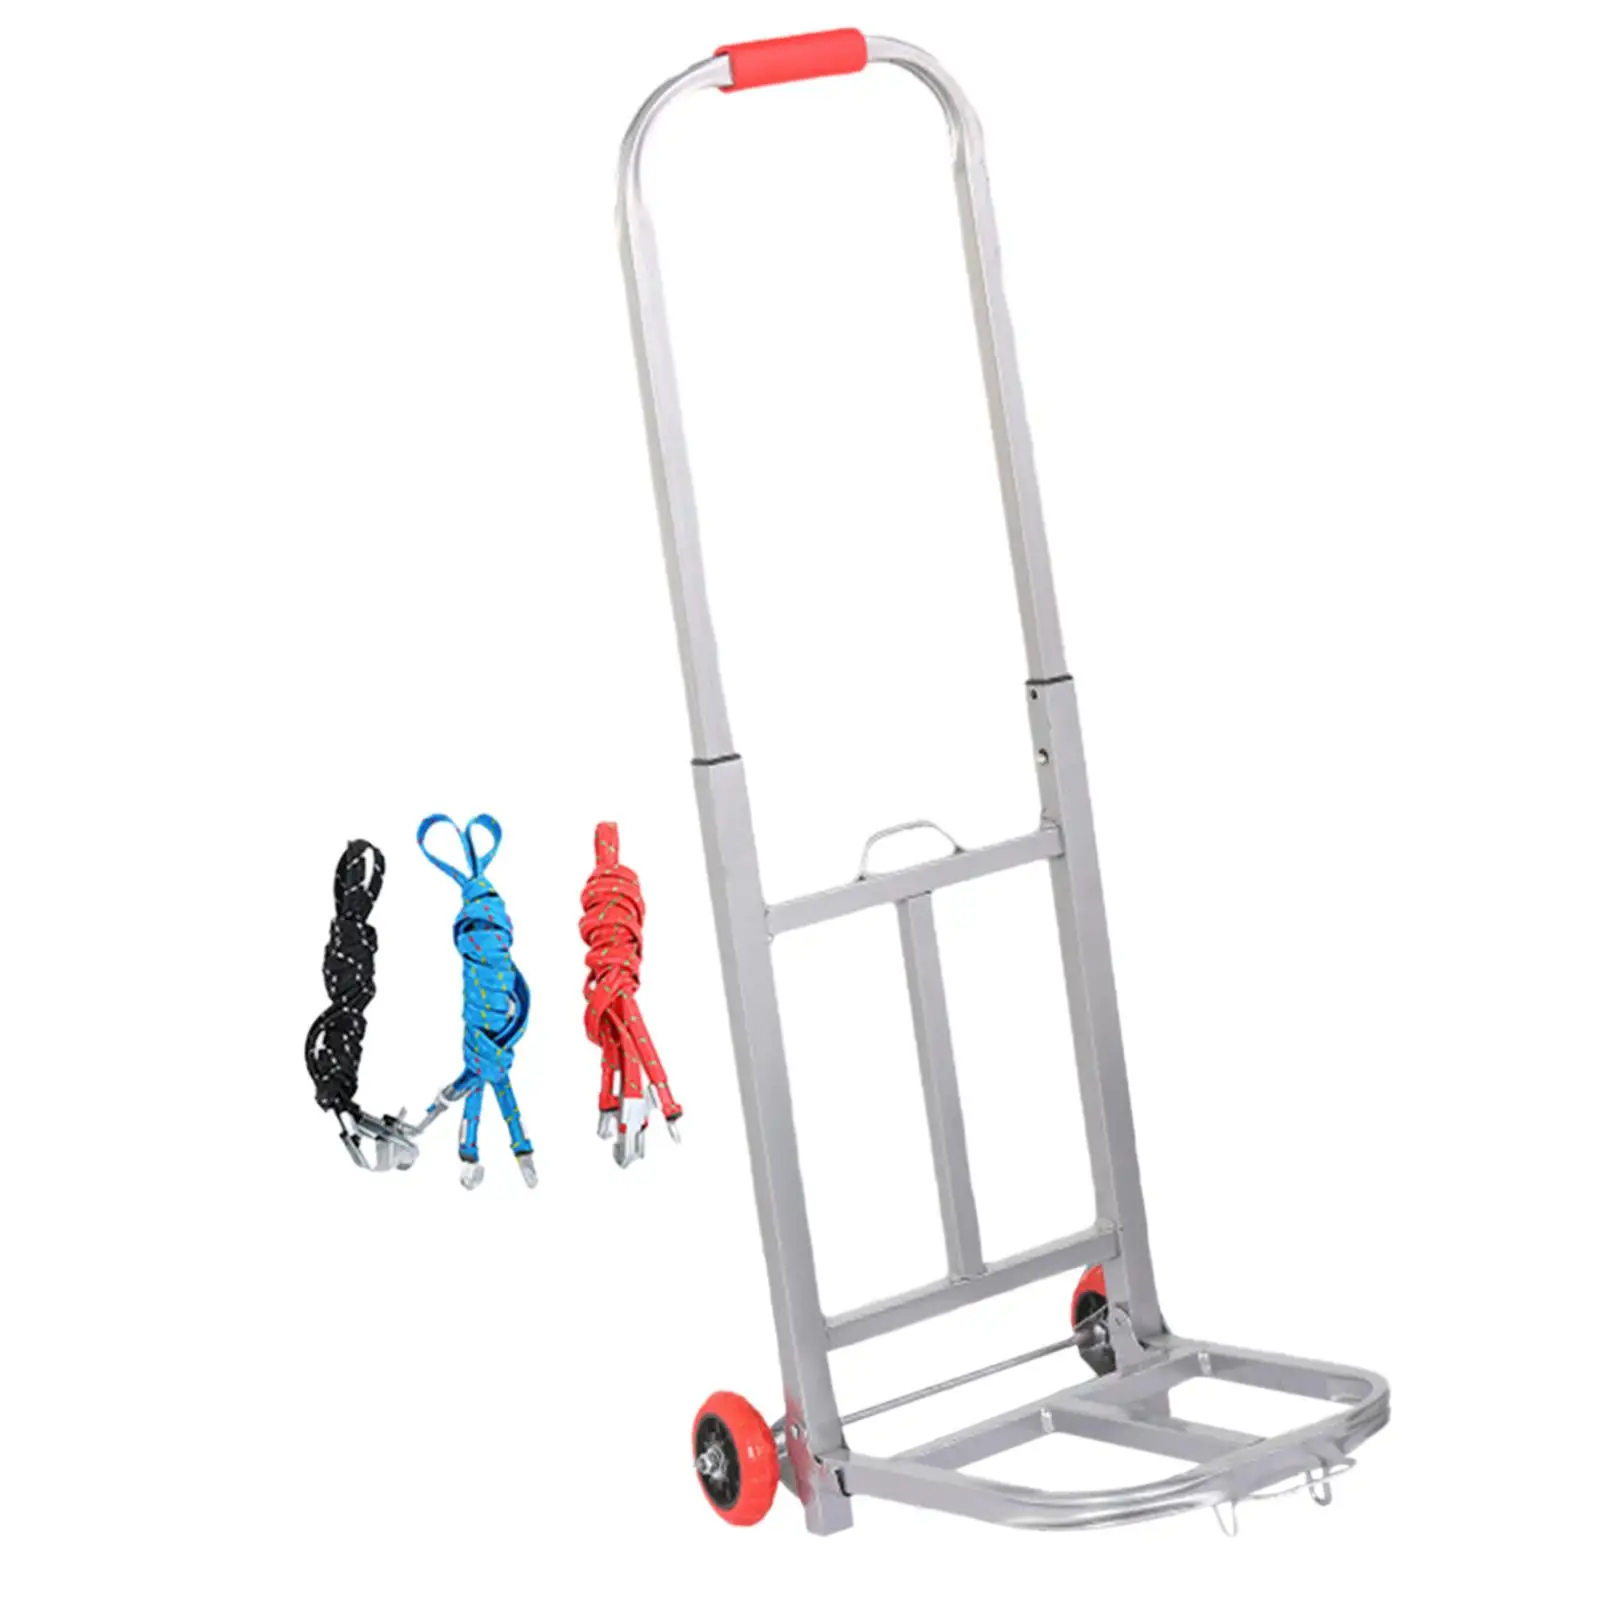 Collapsible Hand Truck Luggage Trolley Cart Metal Frame for Personal Travel